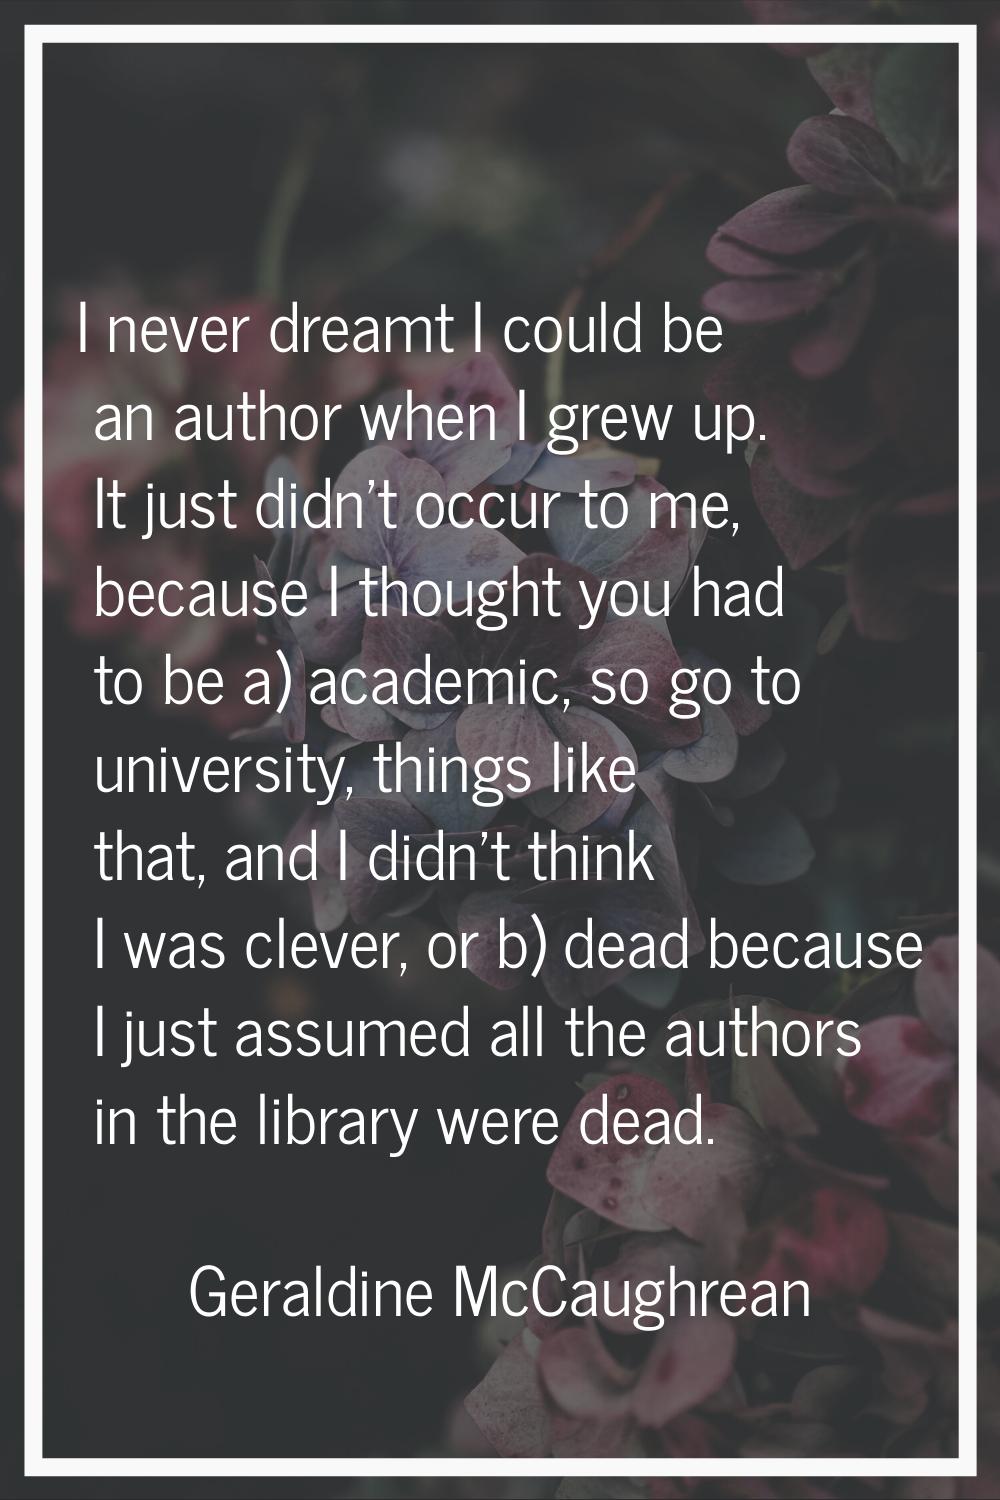 I never dreamt I could be an author when I grew up. It just didn't occur to me, because I thought y